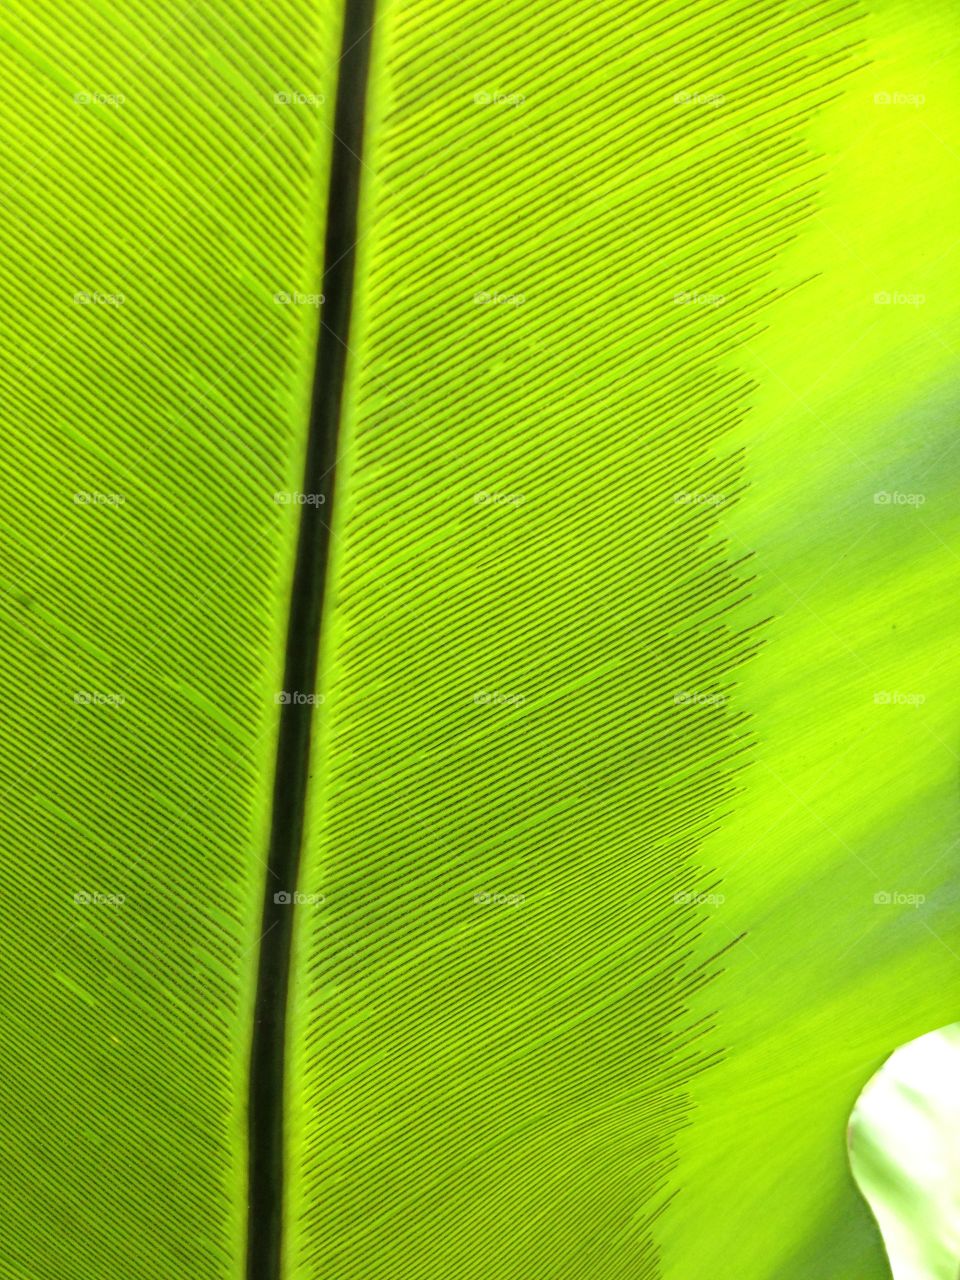 A close-up of the bottom of a big fern leaf in the botanical garden of Singapore. Could be used as background image.